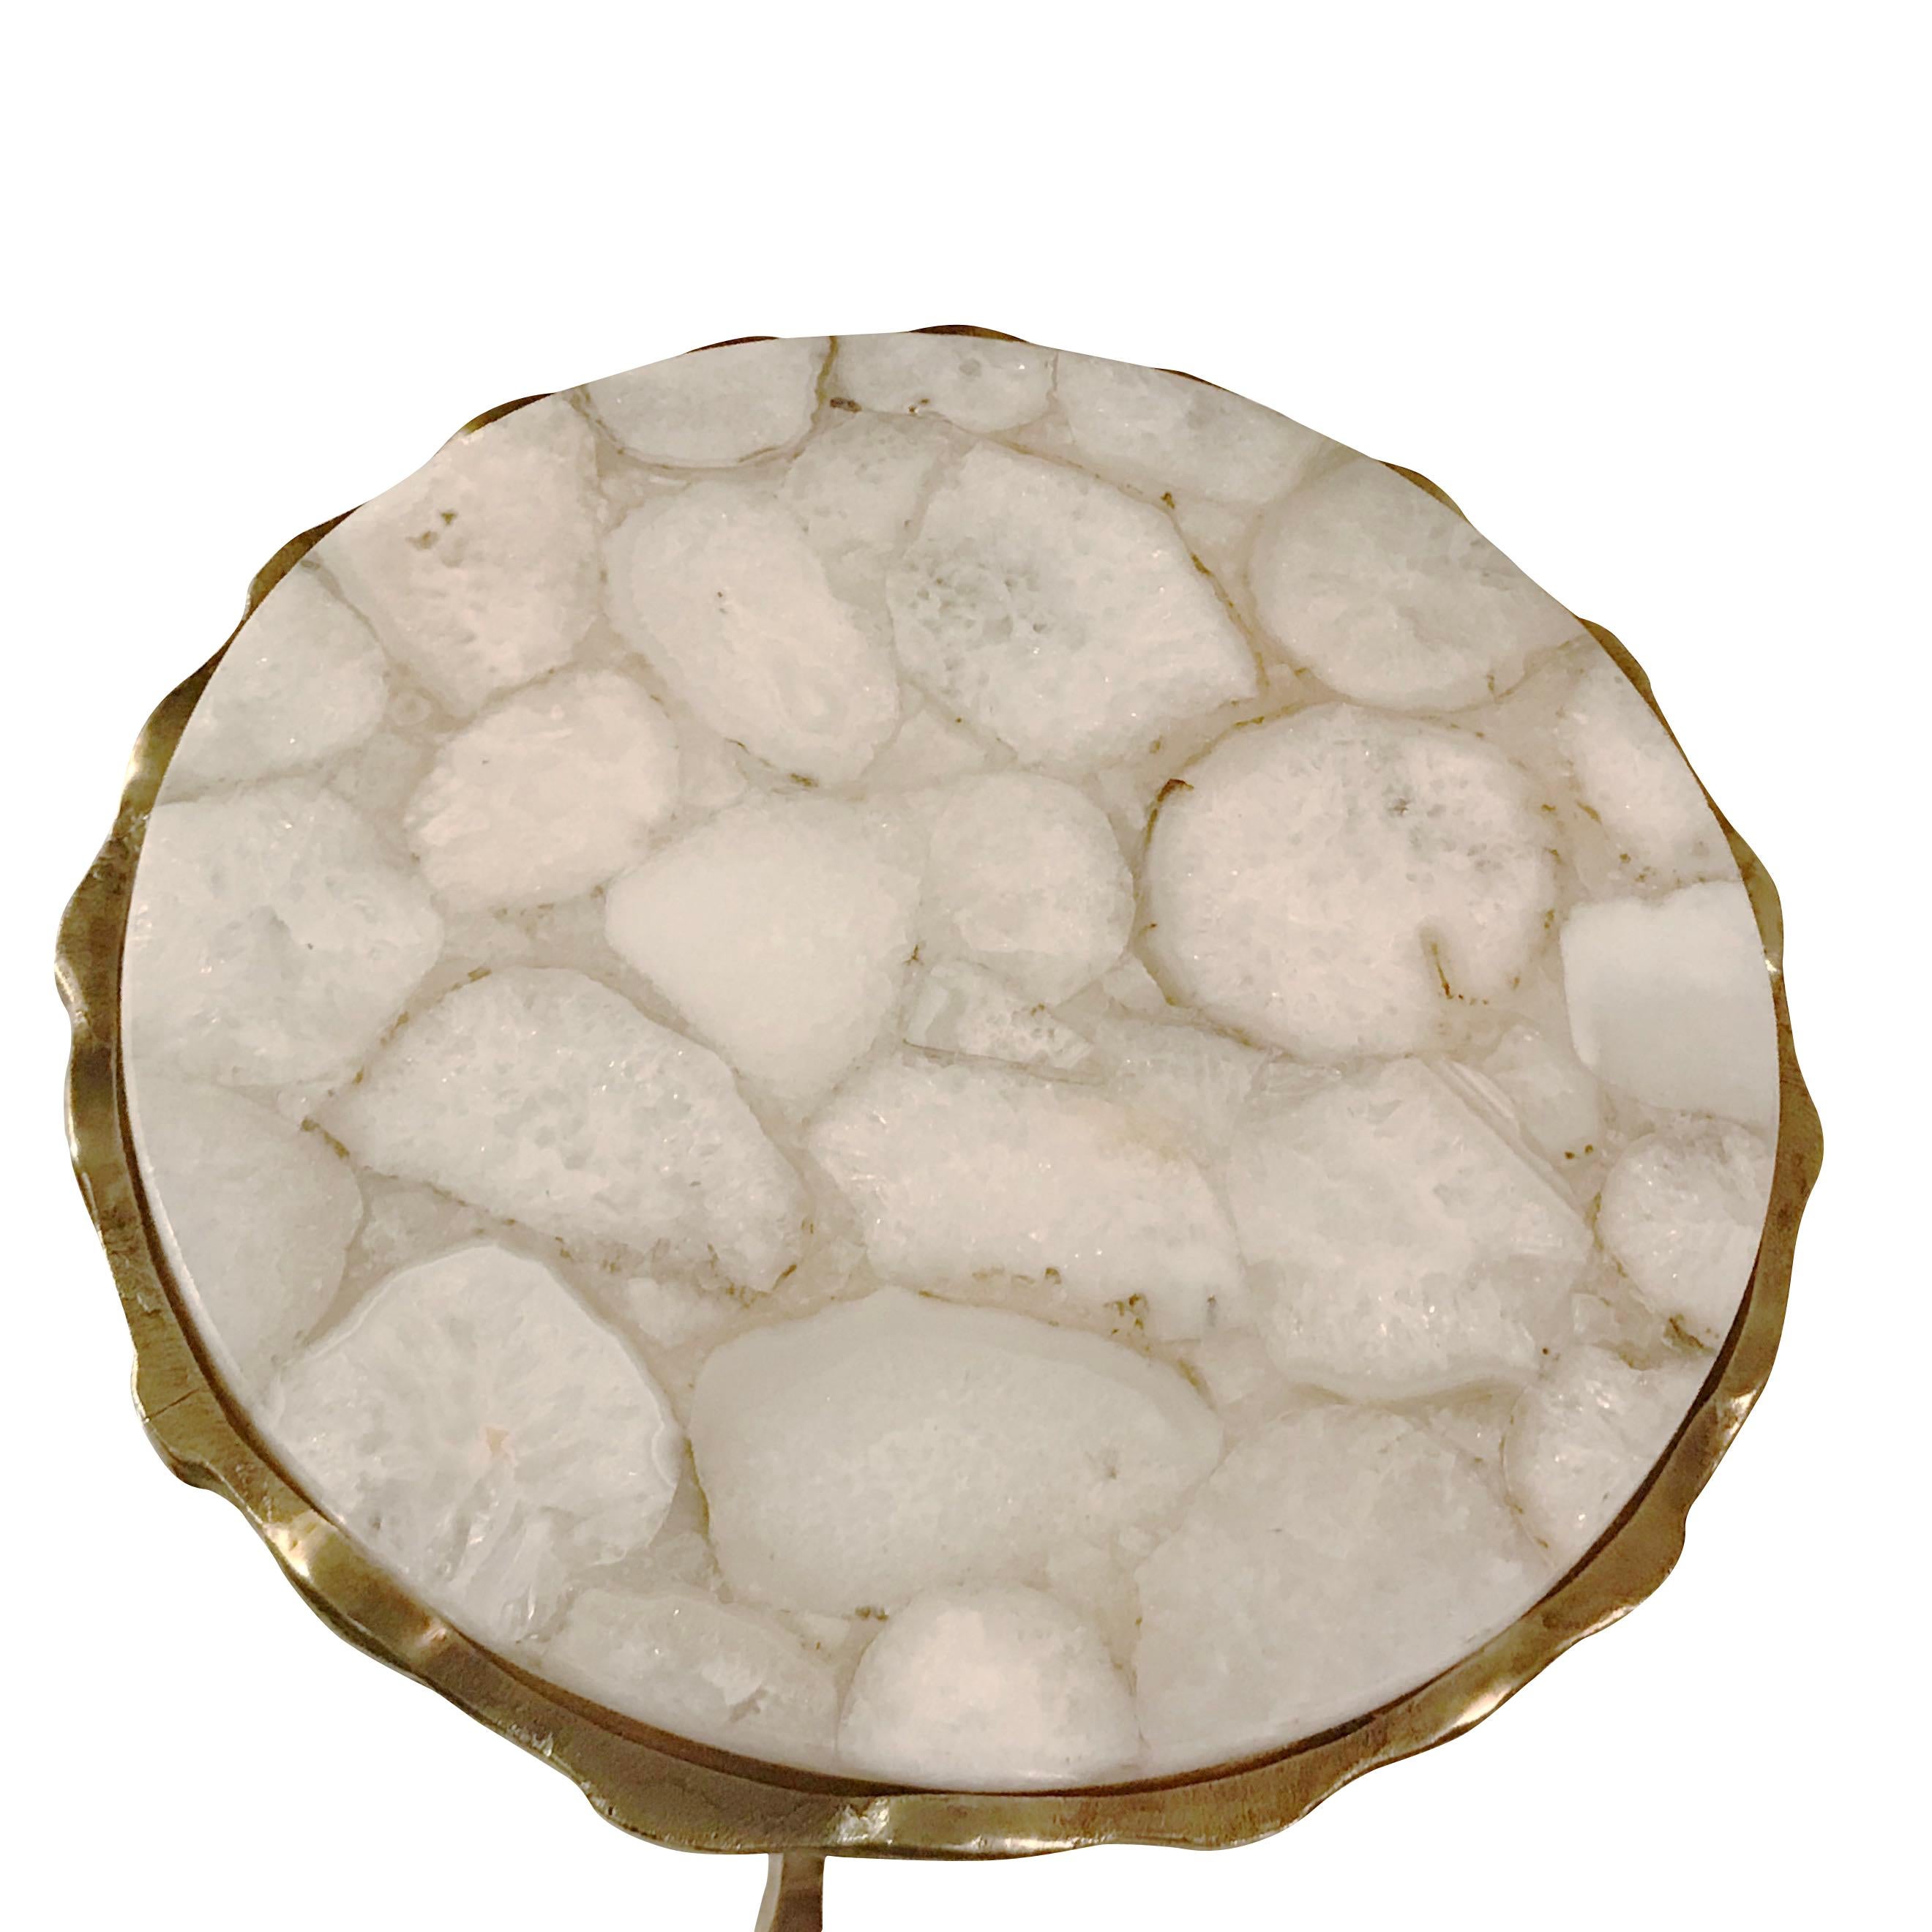 Contemporary Belgian round cocktail table with top of polished pieced or sliced white agate.
Tripod hammered bronze legs.